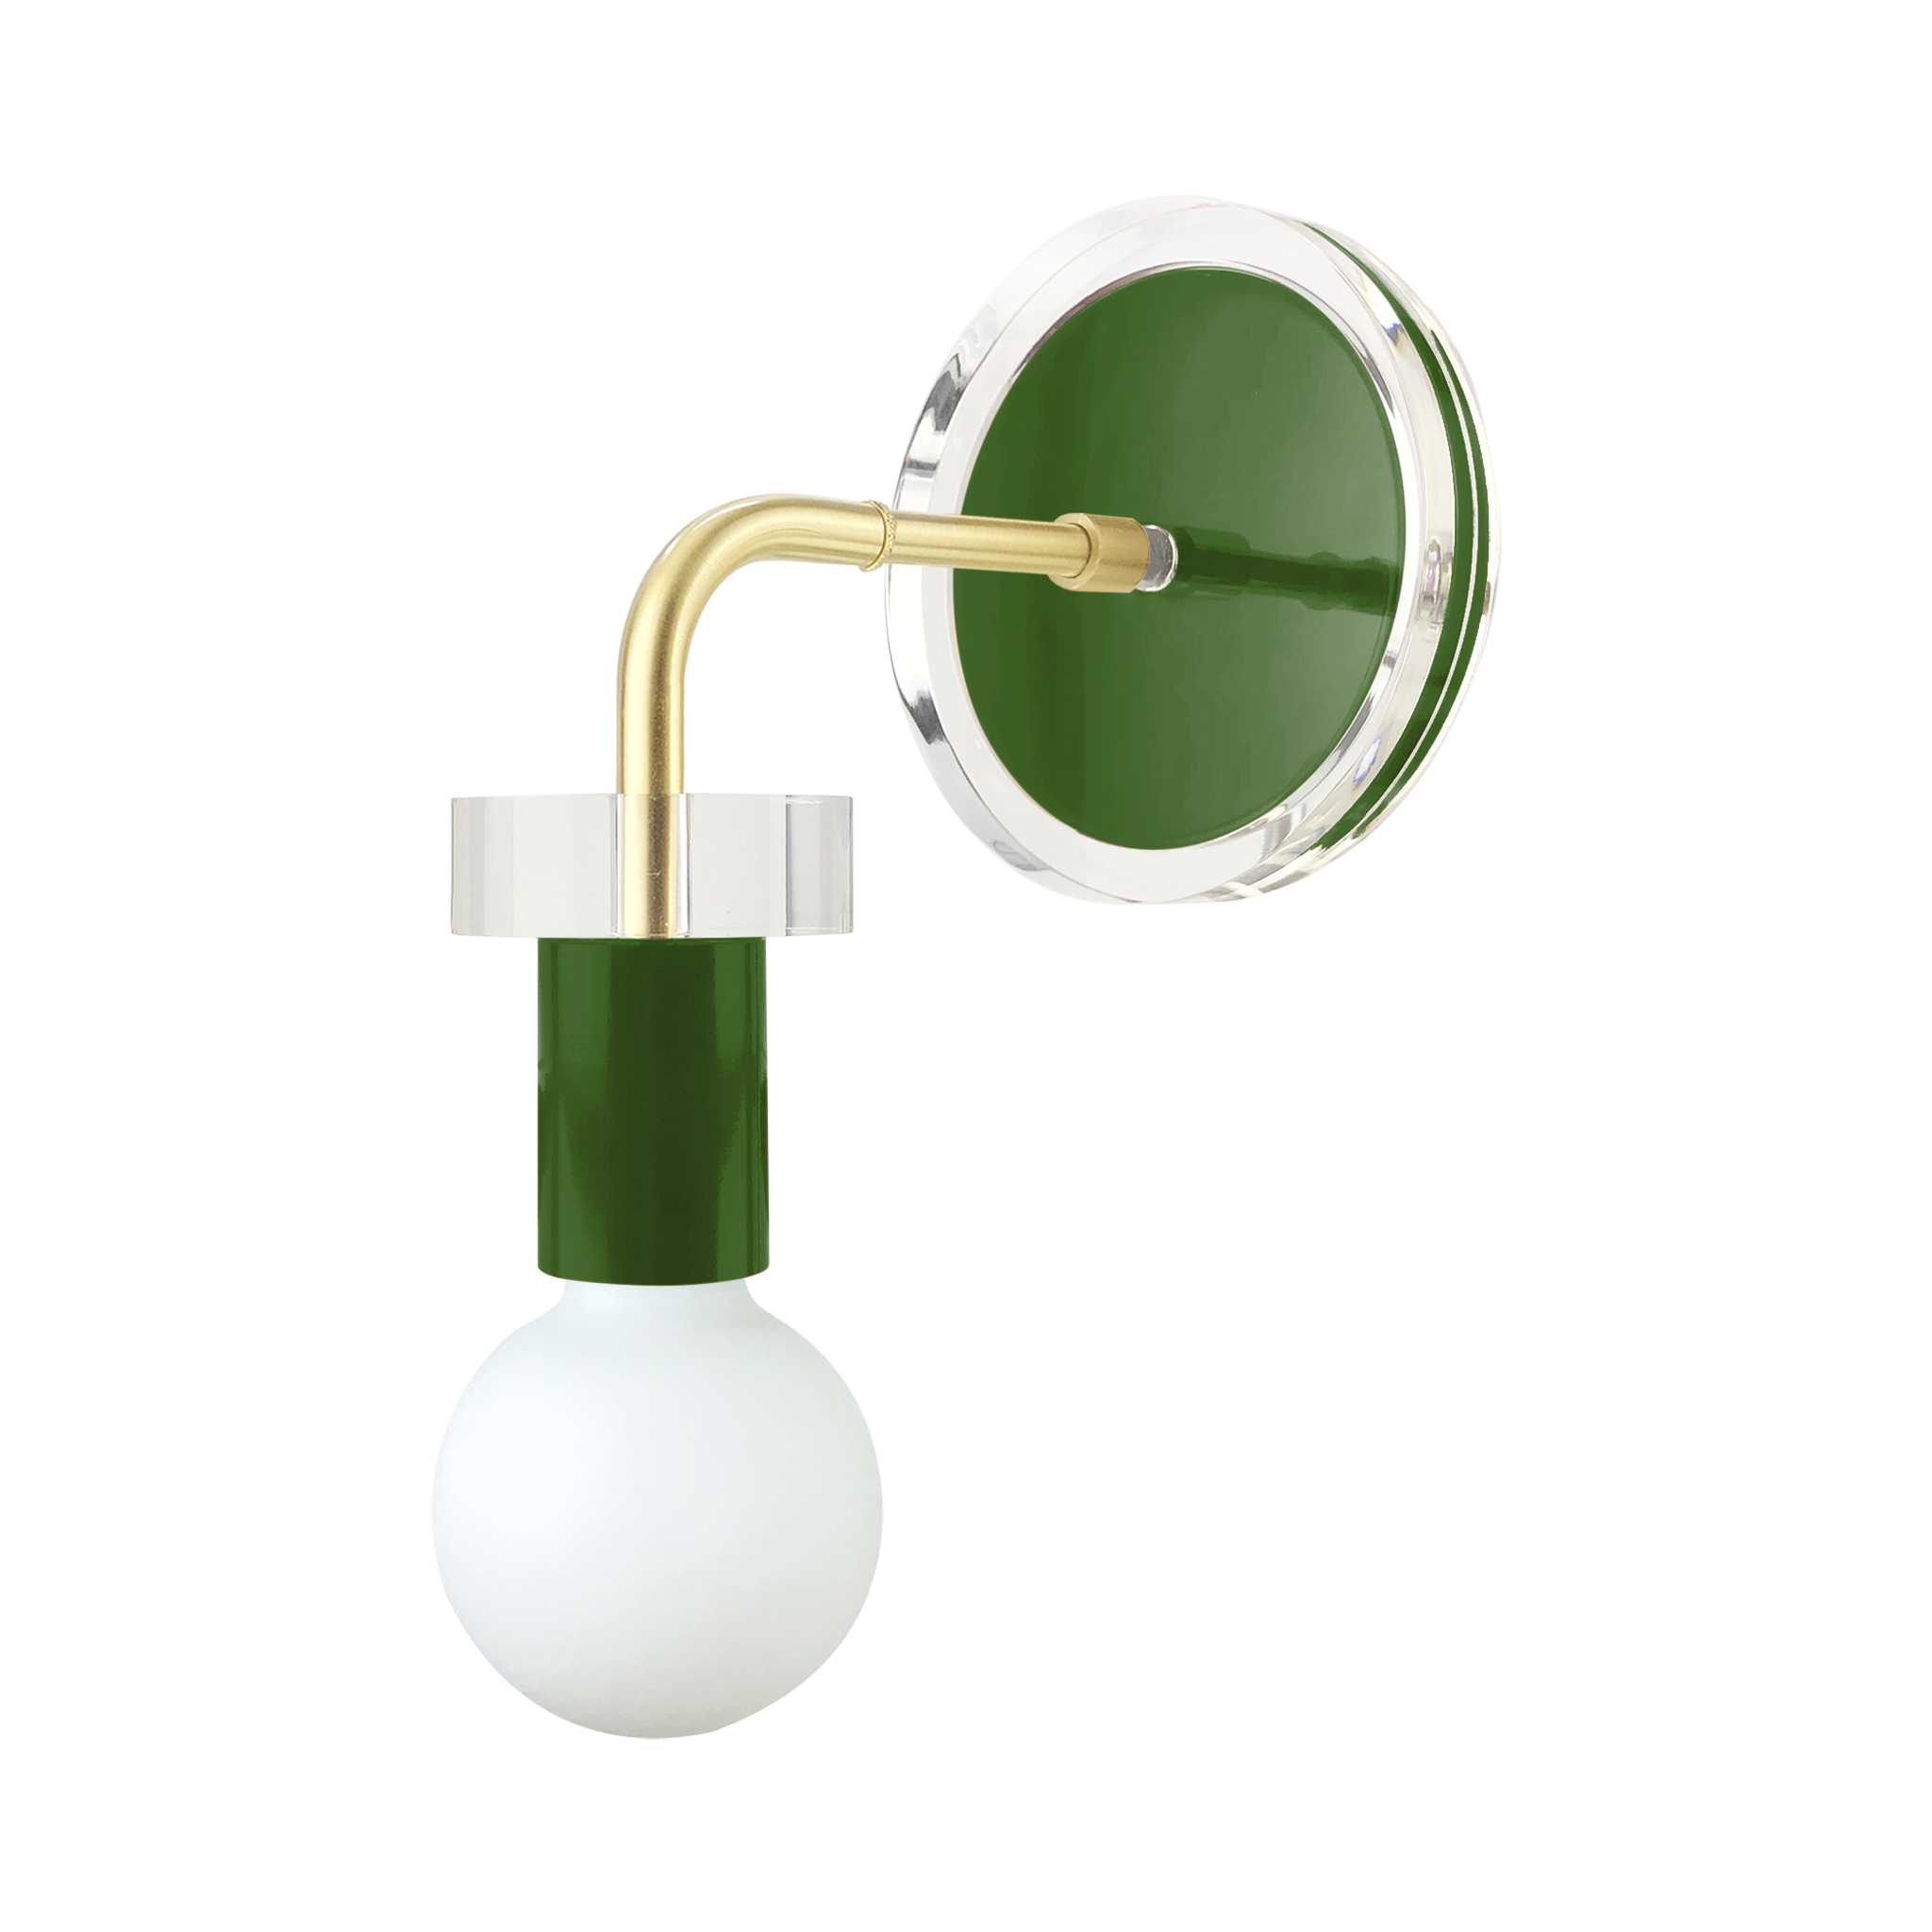 Brass and python green color Adore sconce Dutton Brown lighting